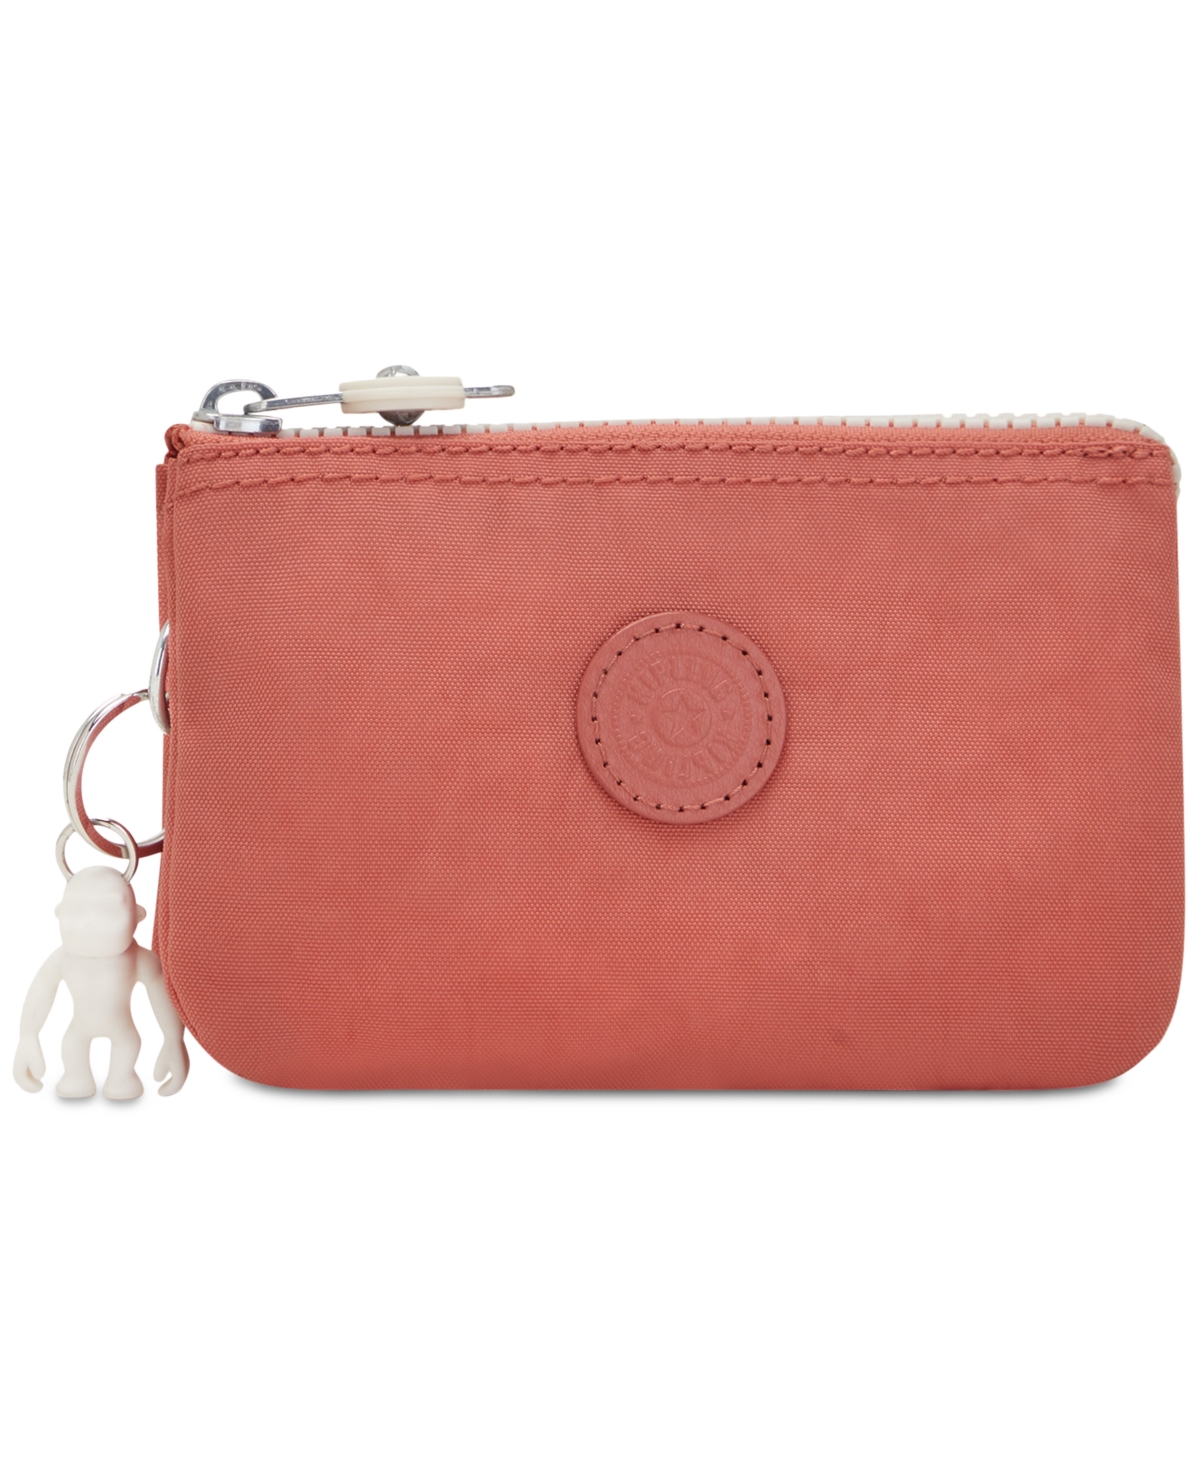 Kipling Creativity Small Pouch with Keychain